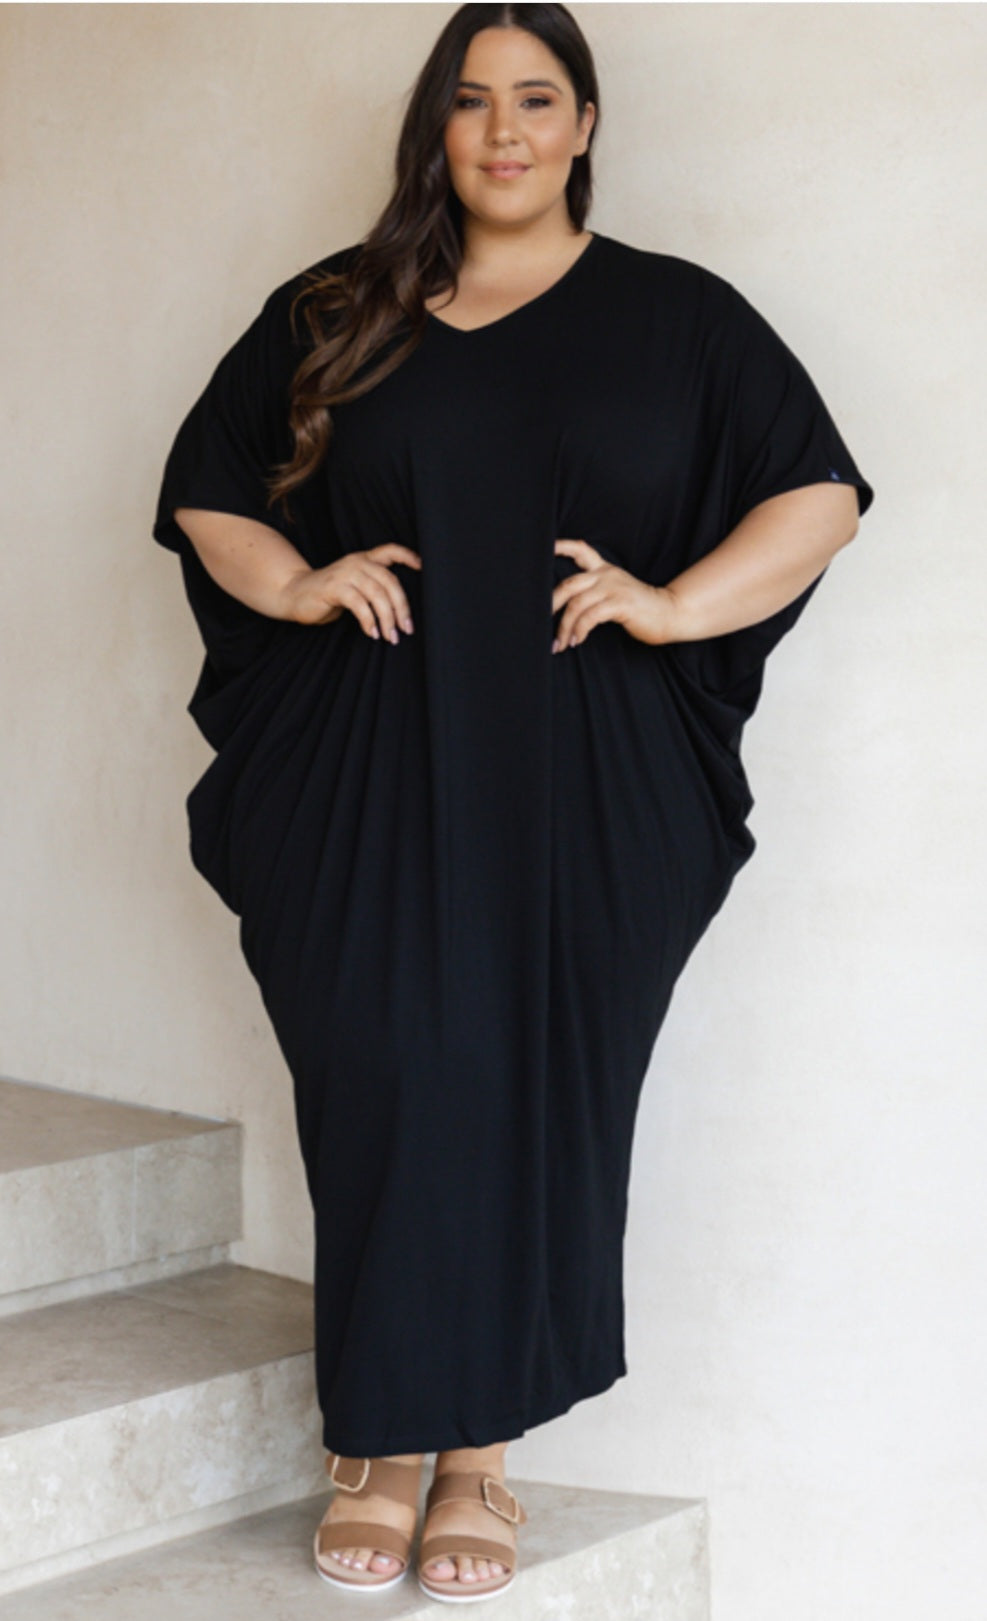 Maxi Miracle Dress in Black